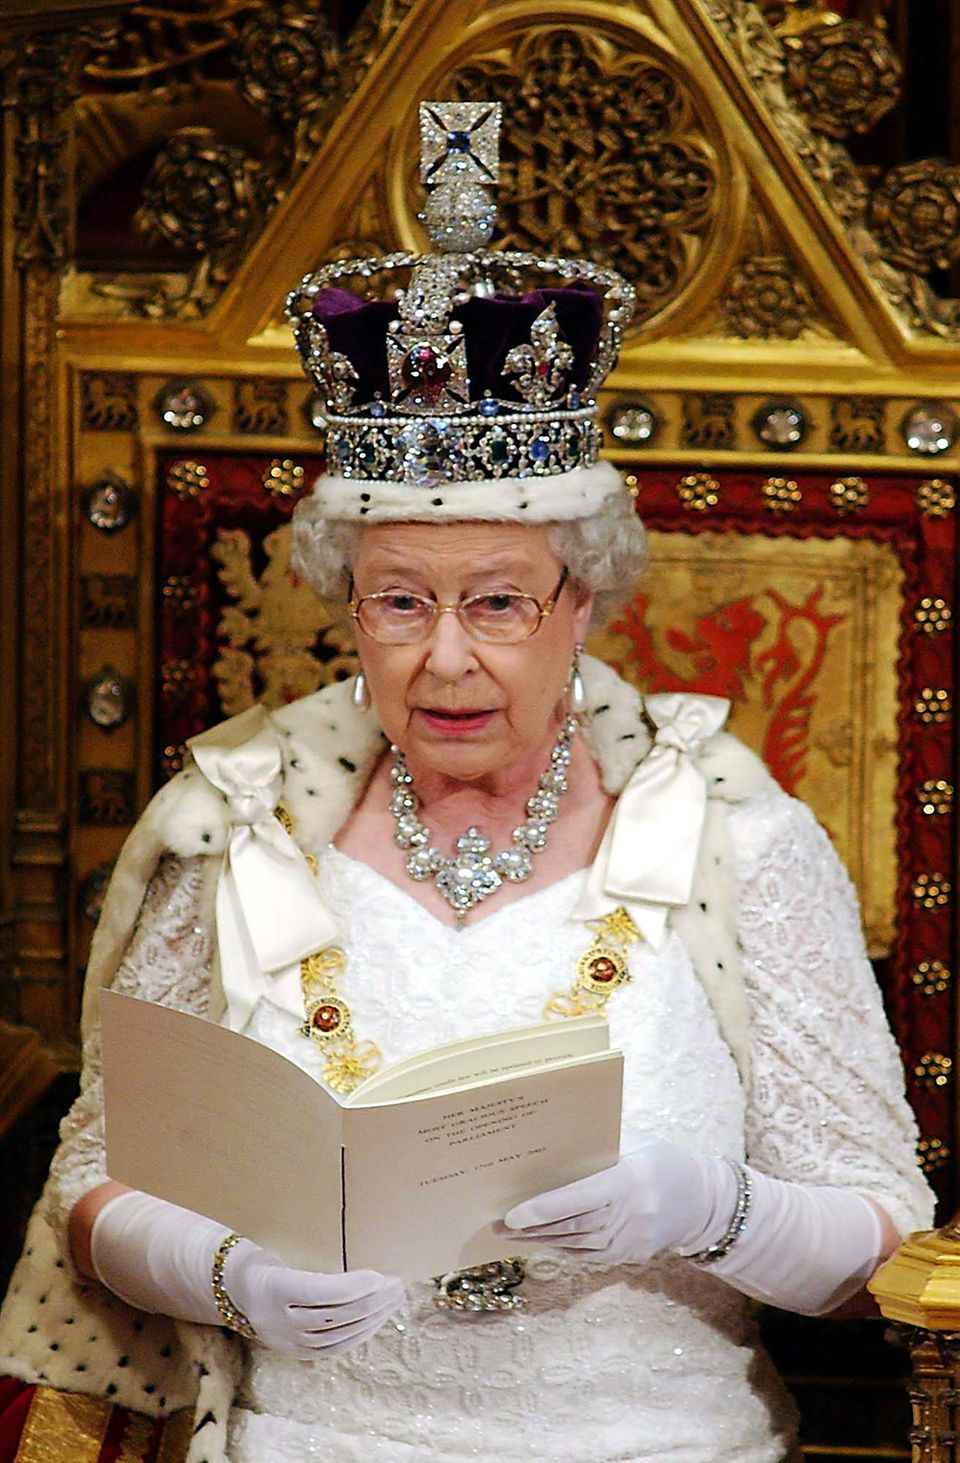 Queen Elizabeth II with the Imperial State Crown at the State Opening of Parliament. 